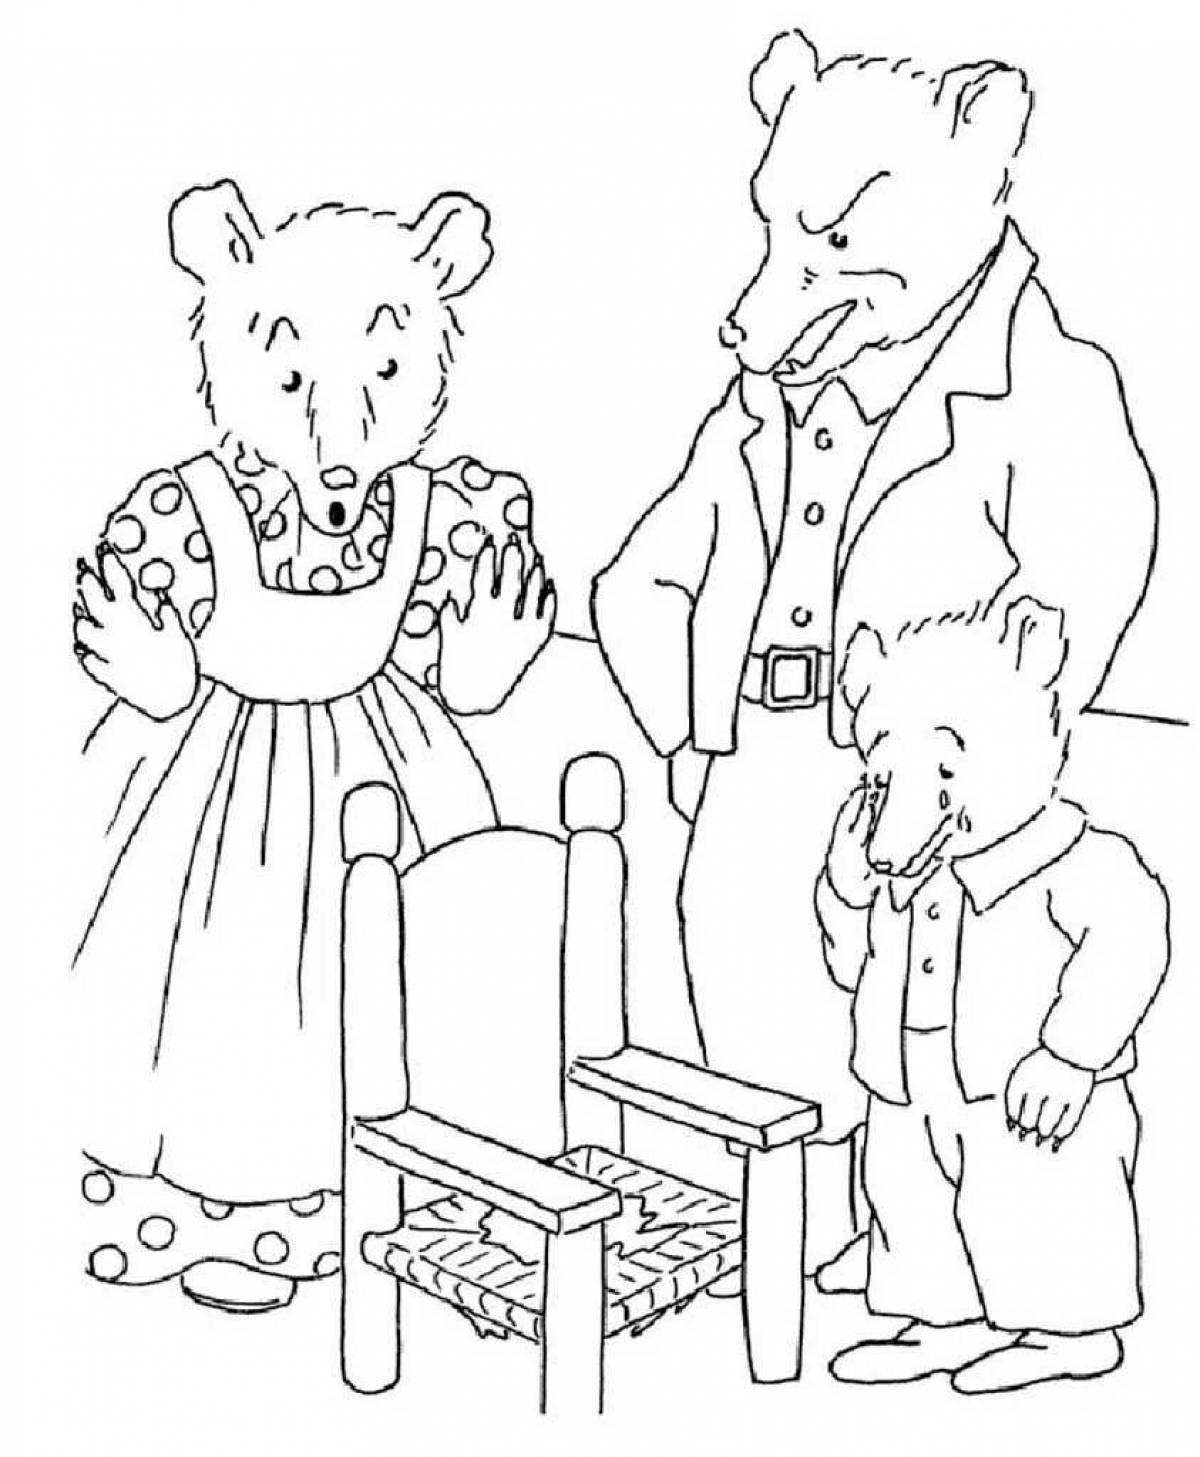 Three bears coloring book for kids